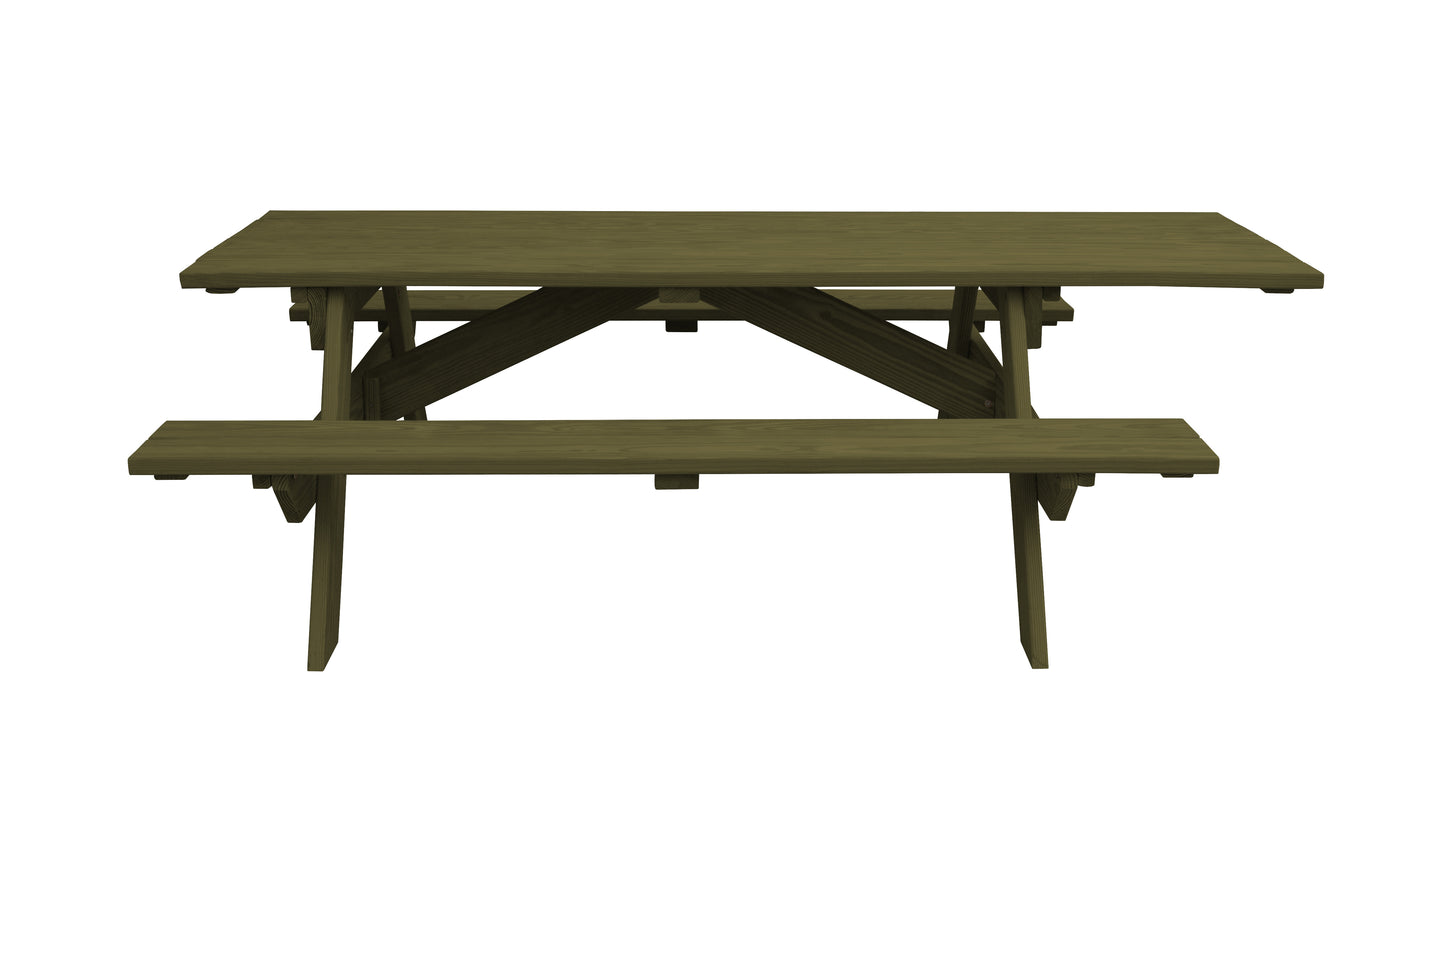 A&L Furniture Co. Heavy Duty ADA Compliant Commercial Pressure Treated Pine Park Picnic Table  - LEAD TIME TO SHIP 10 BUSINESS DAYS